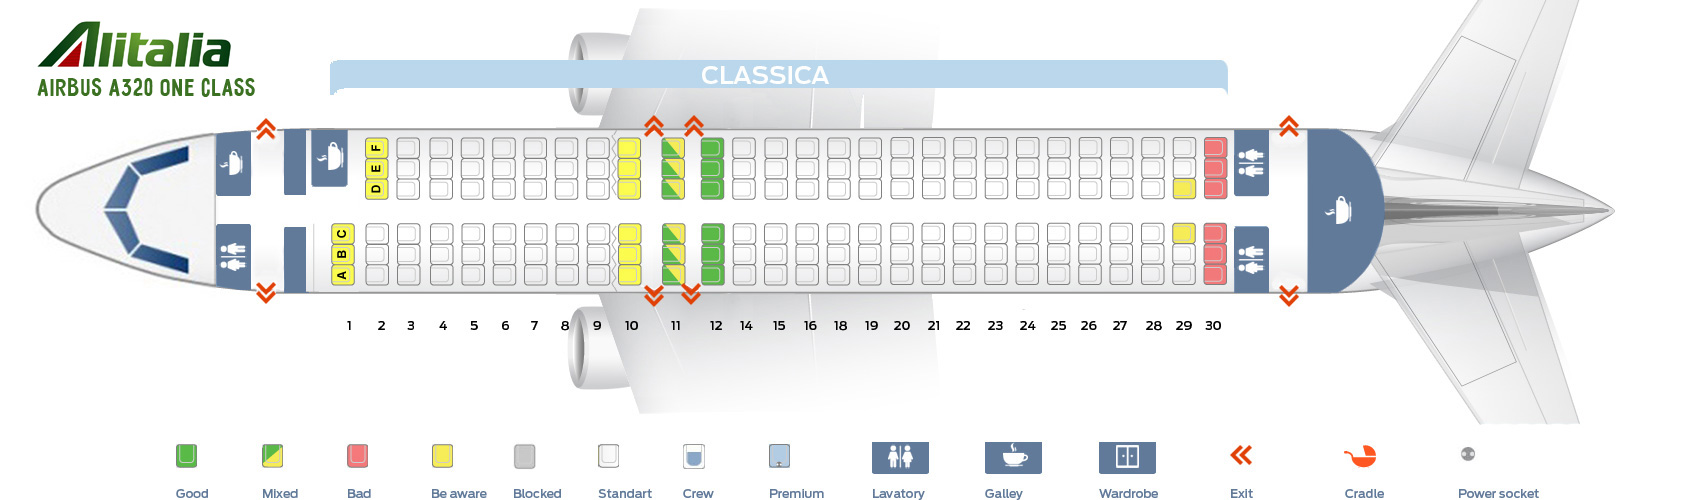 Alitalia Airlines Seating Chart